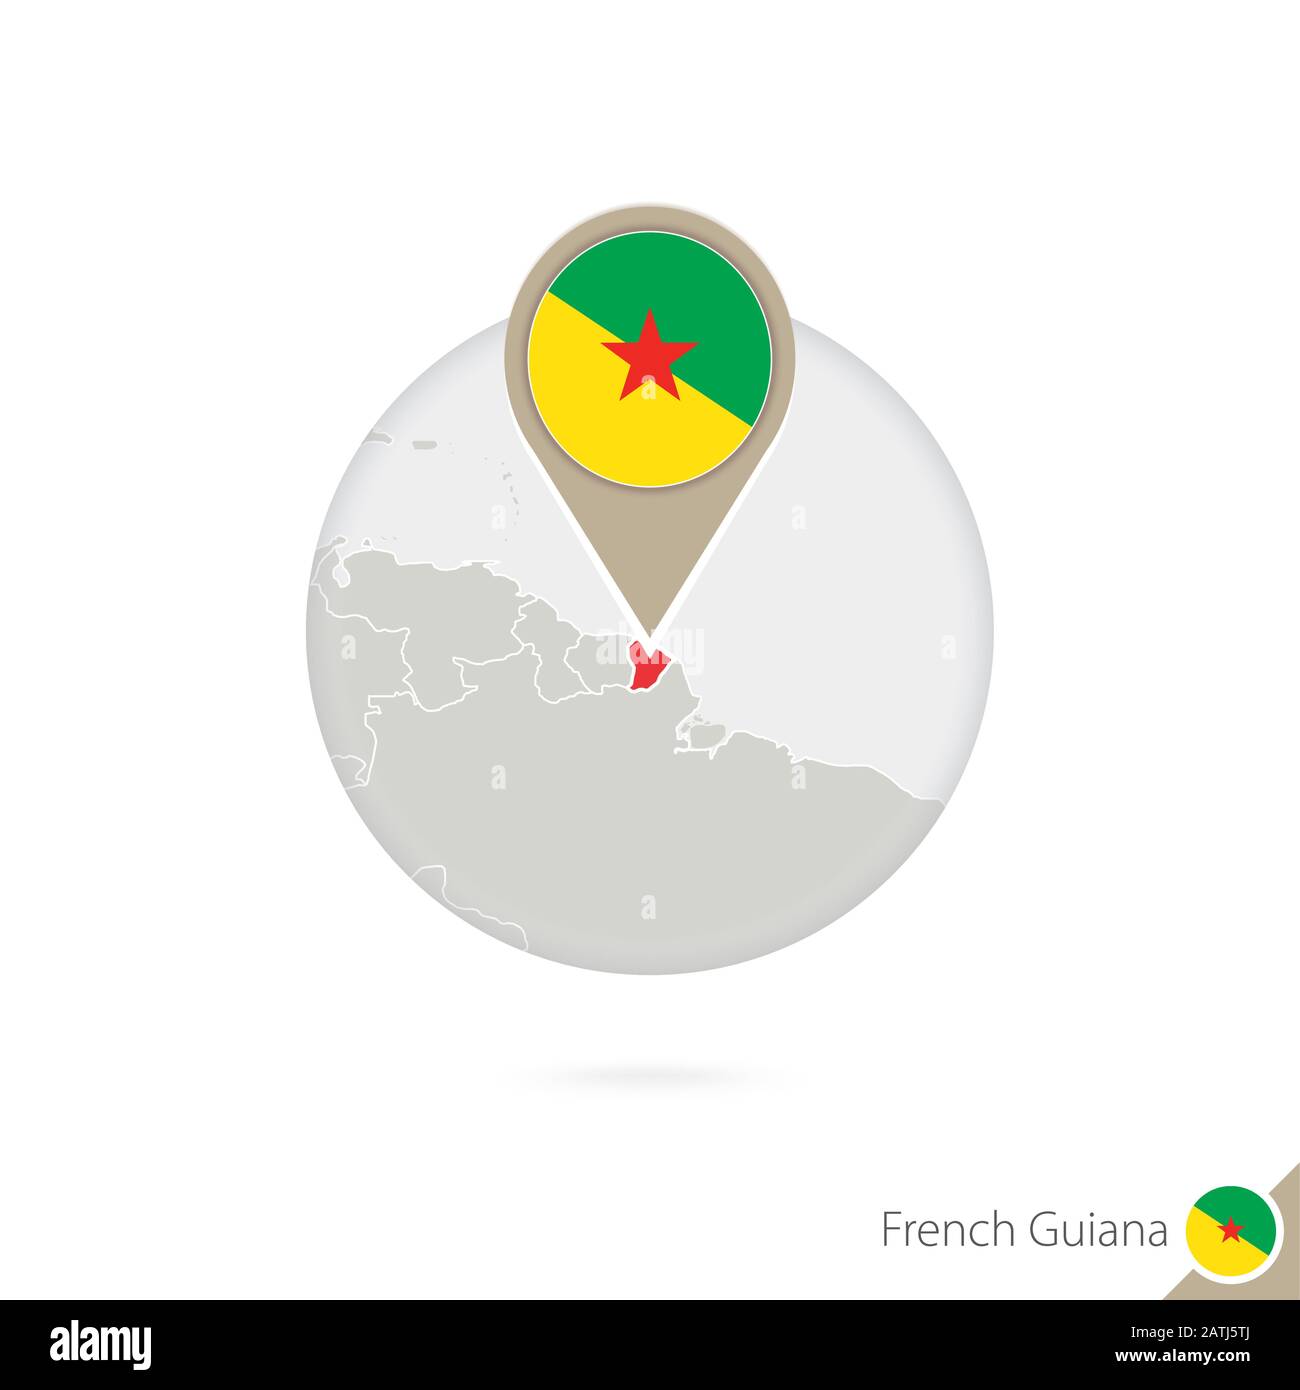 French Guiana map and flag in circle. Map of French Guianal, French Guiana flag pin. Map of French Guiana in the style of the globe. Vector Illustrati Stock Vector